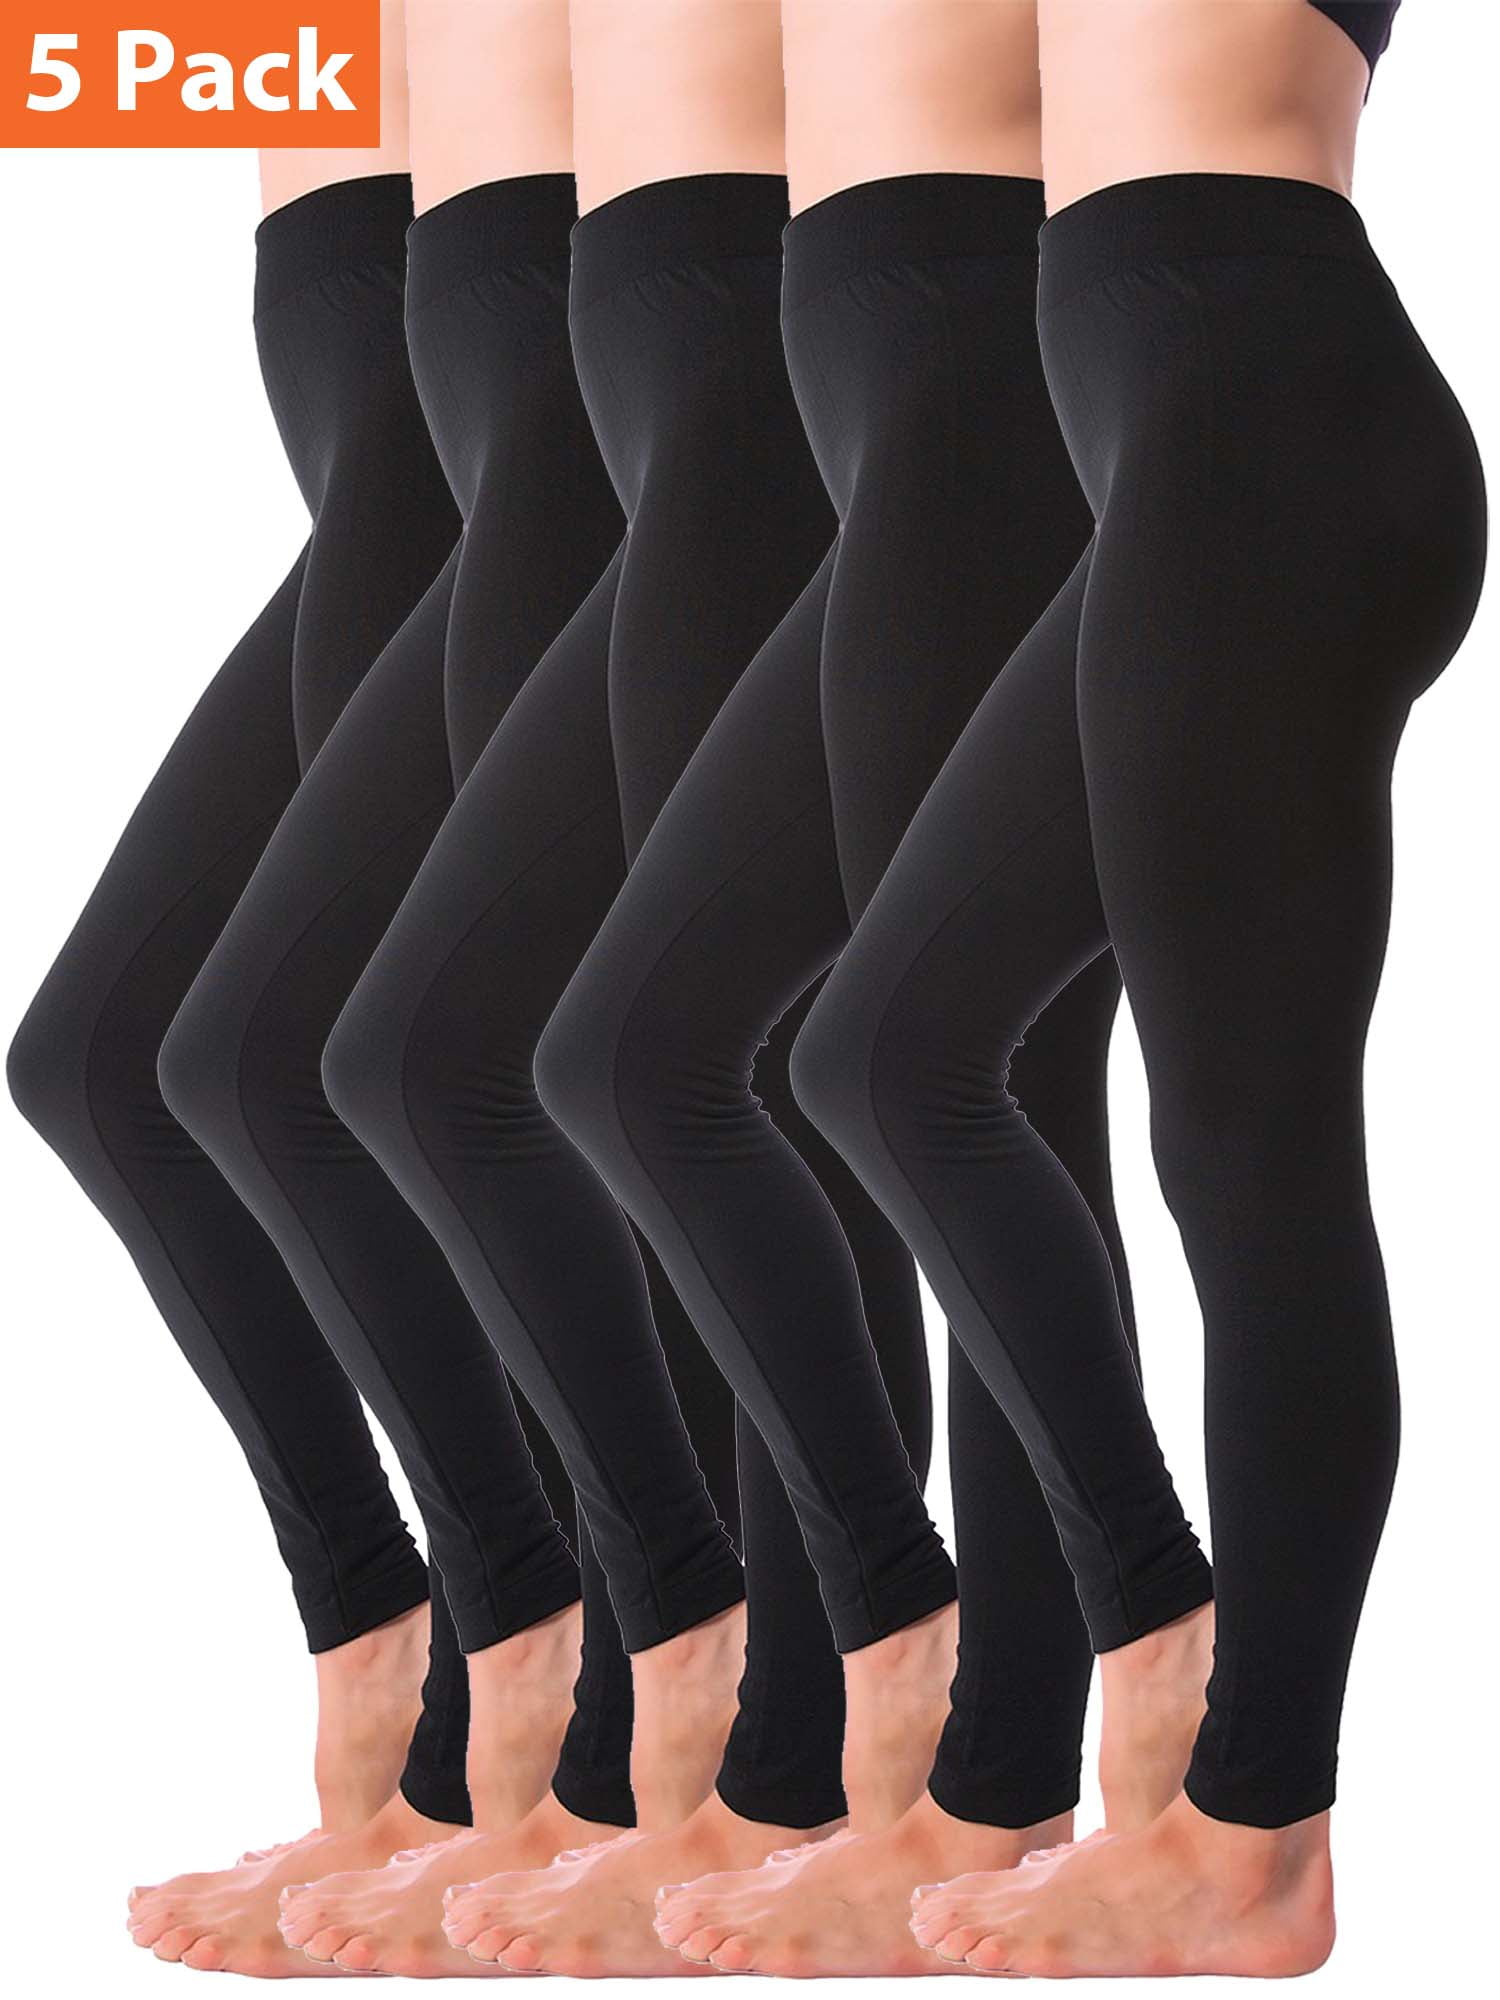 Womens Fleece Leggings Lined Seamless Thick Stretch Warm Winter Thermal Reg Plus 